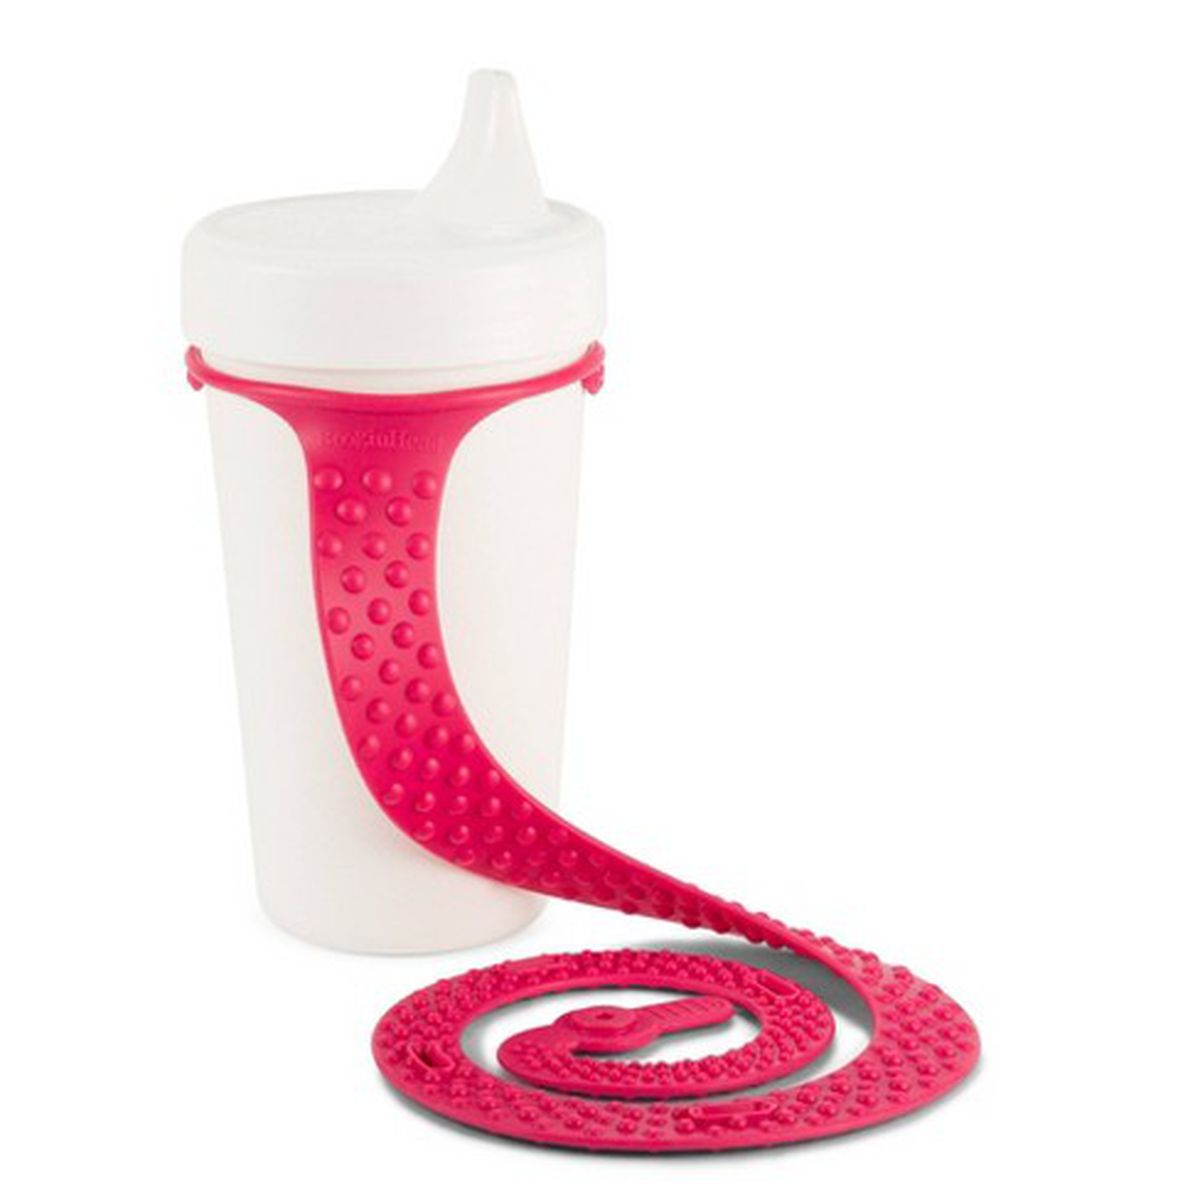 A cup with a long pink strap